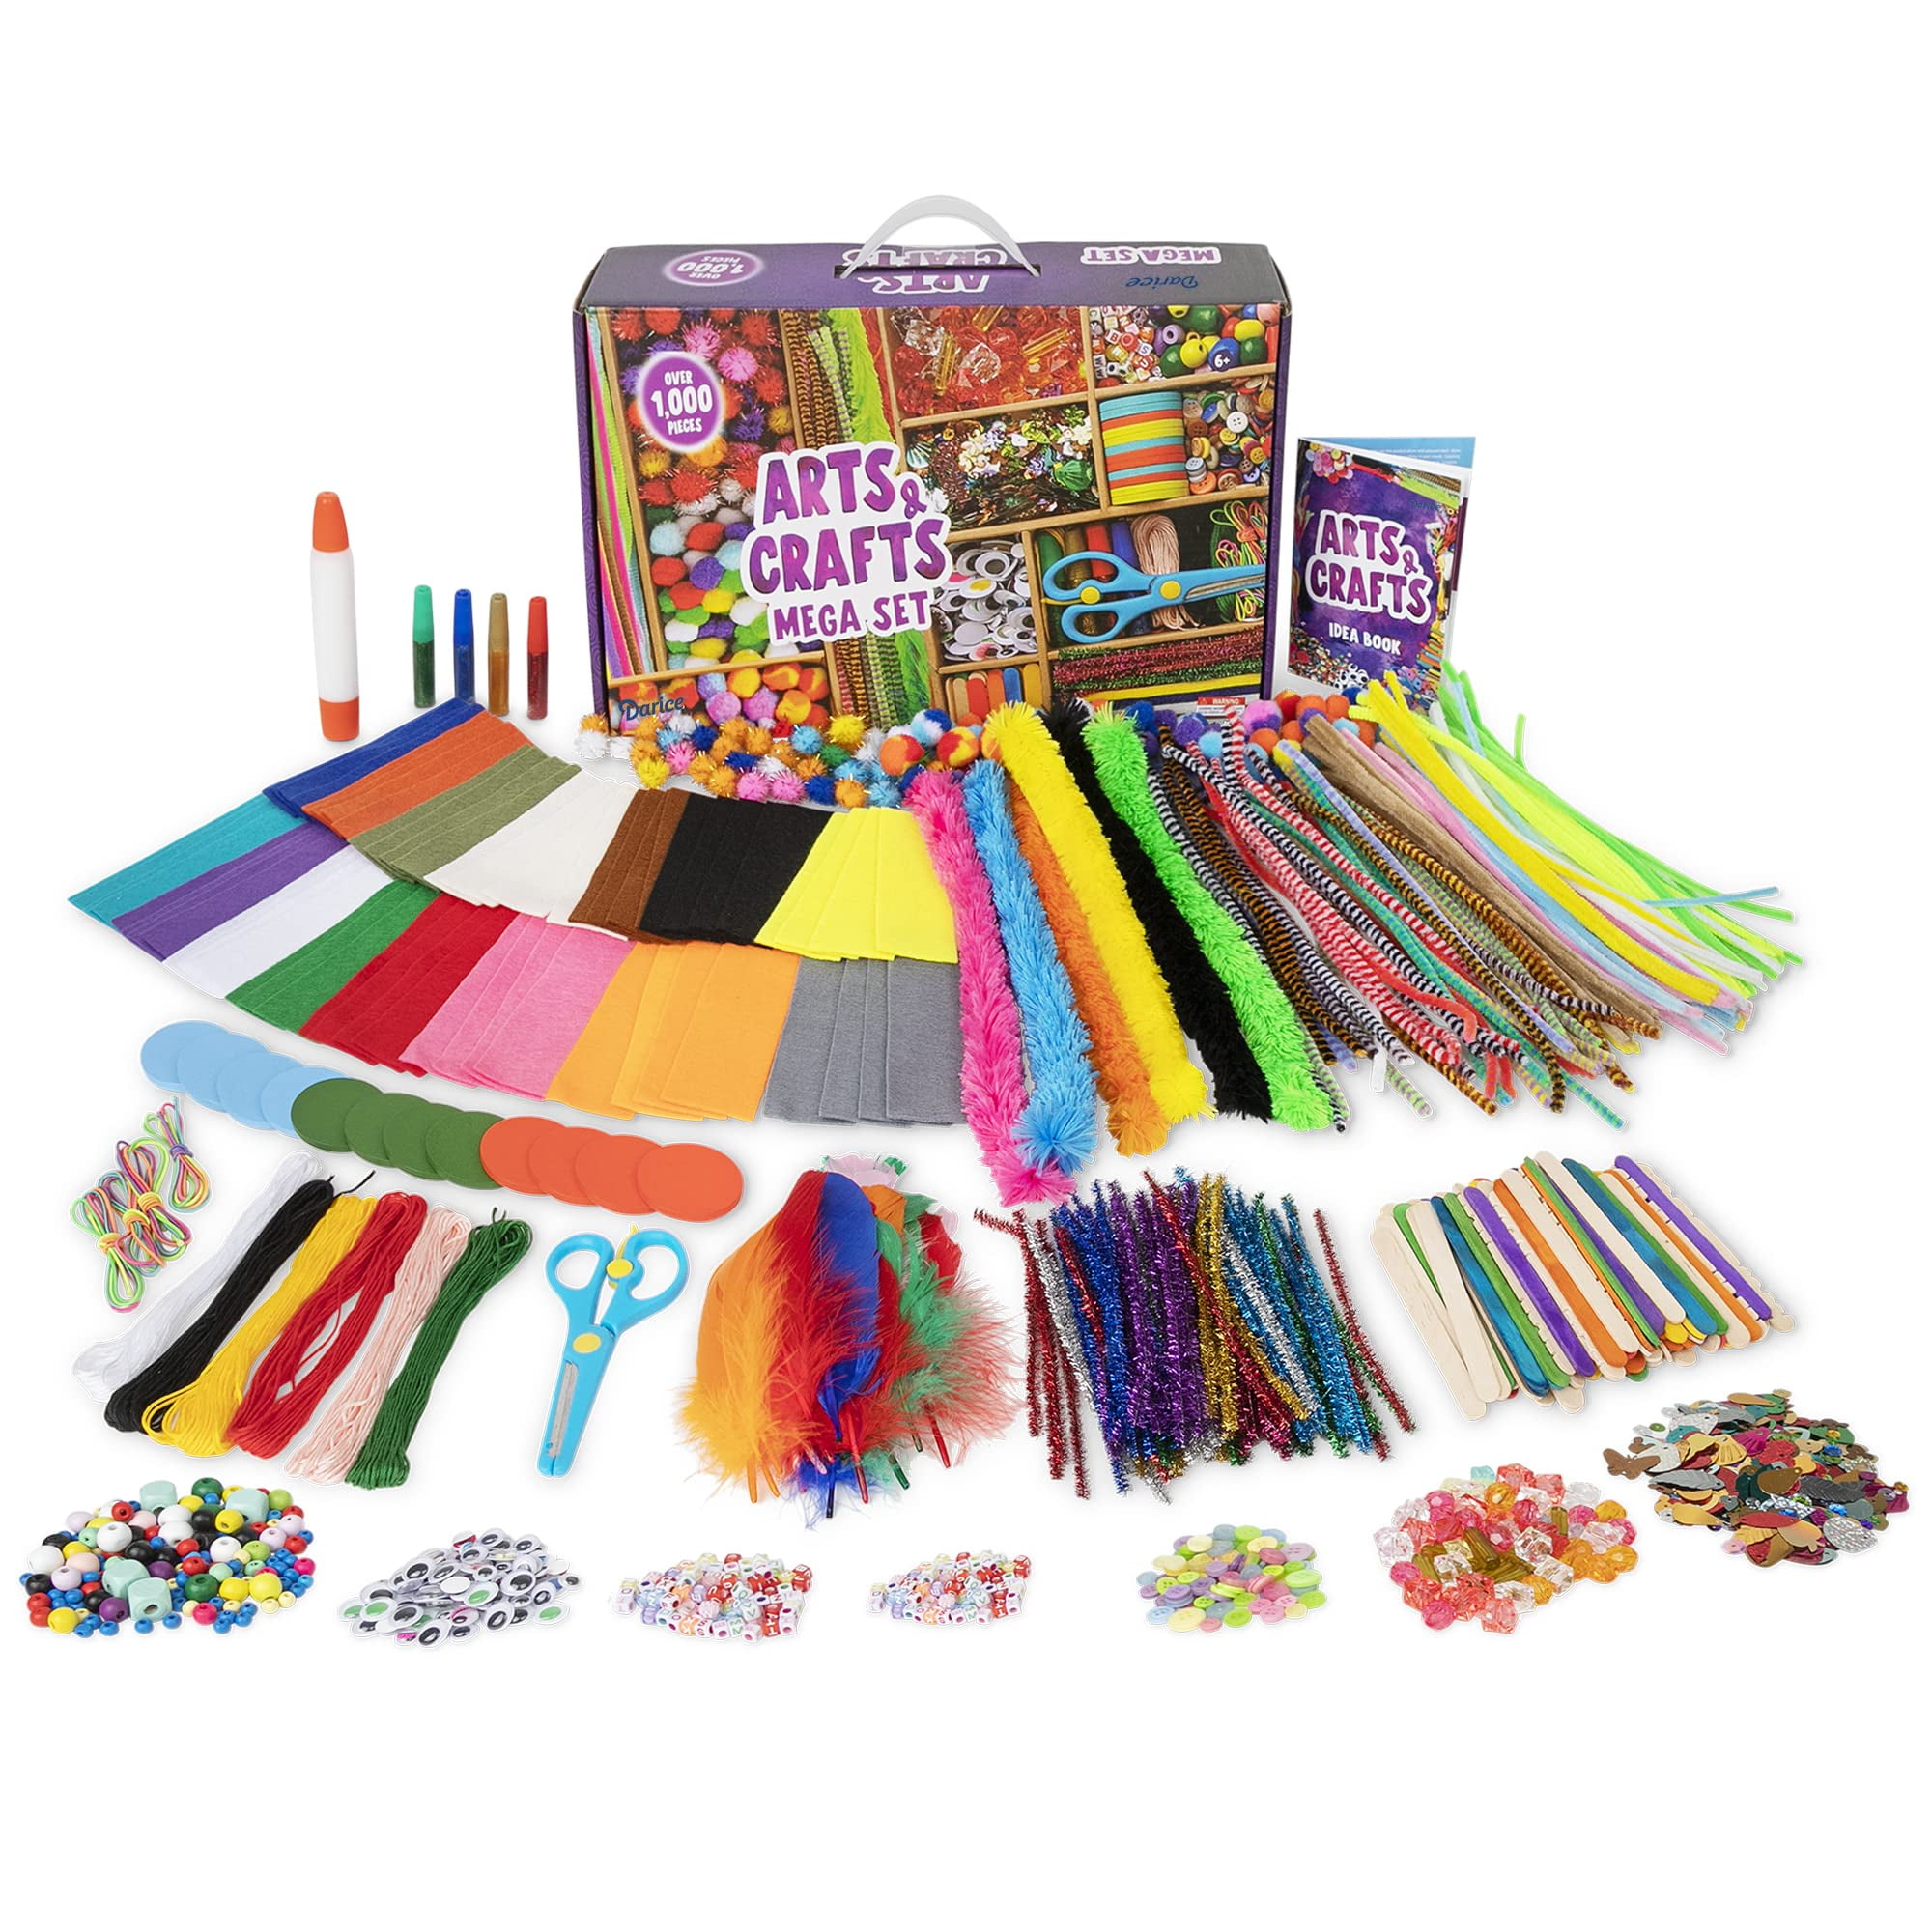 High Quality Coloring Kits by Darice : Greatest Deal for Every Artist